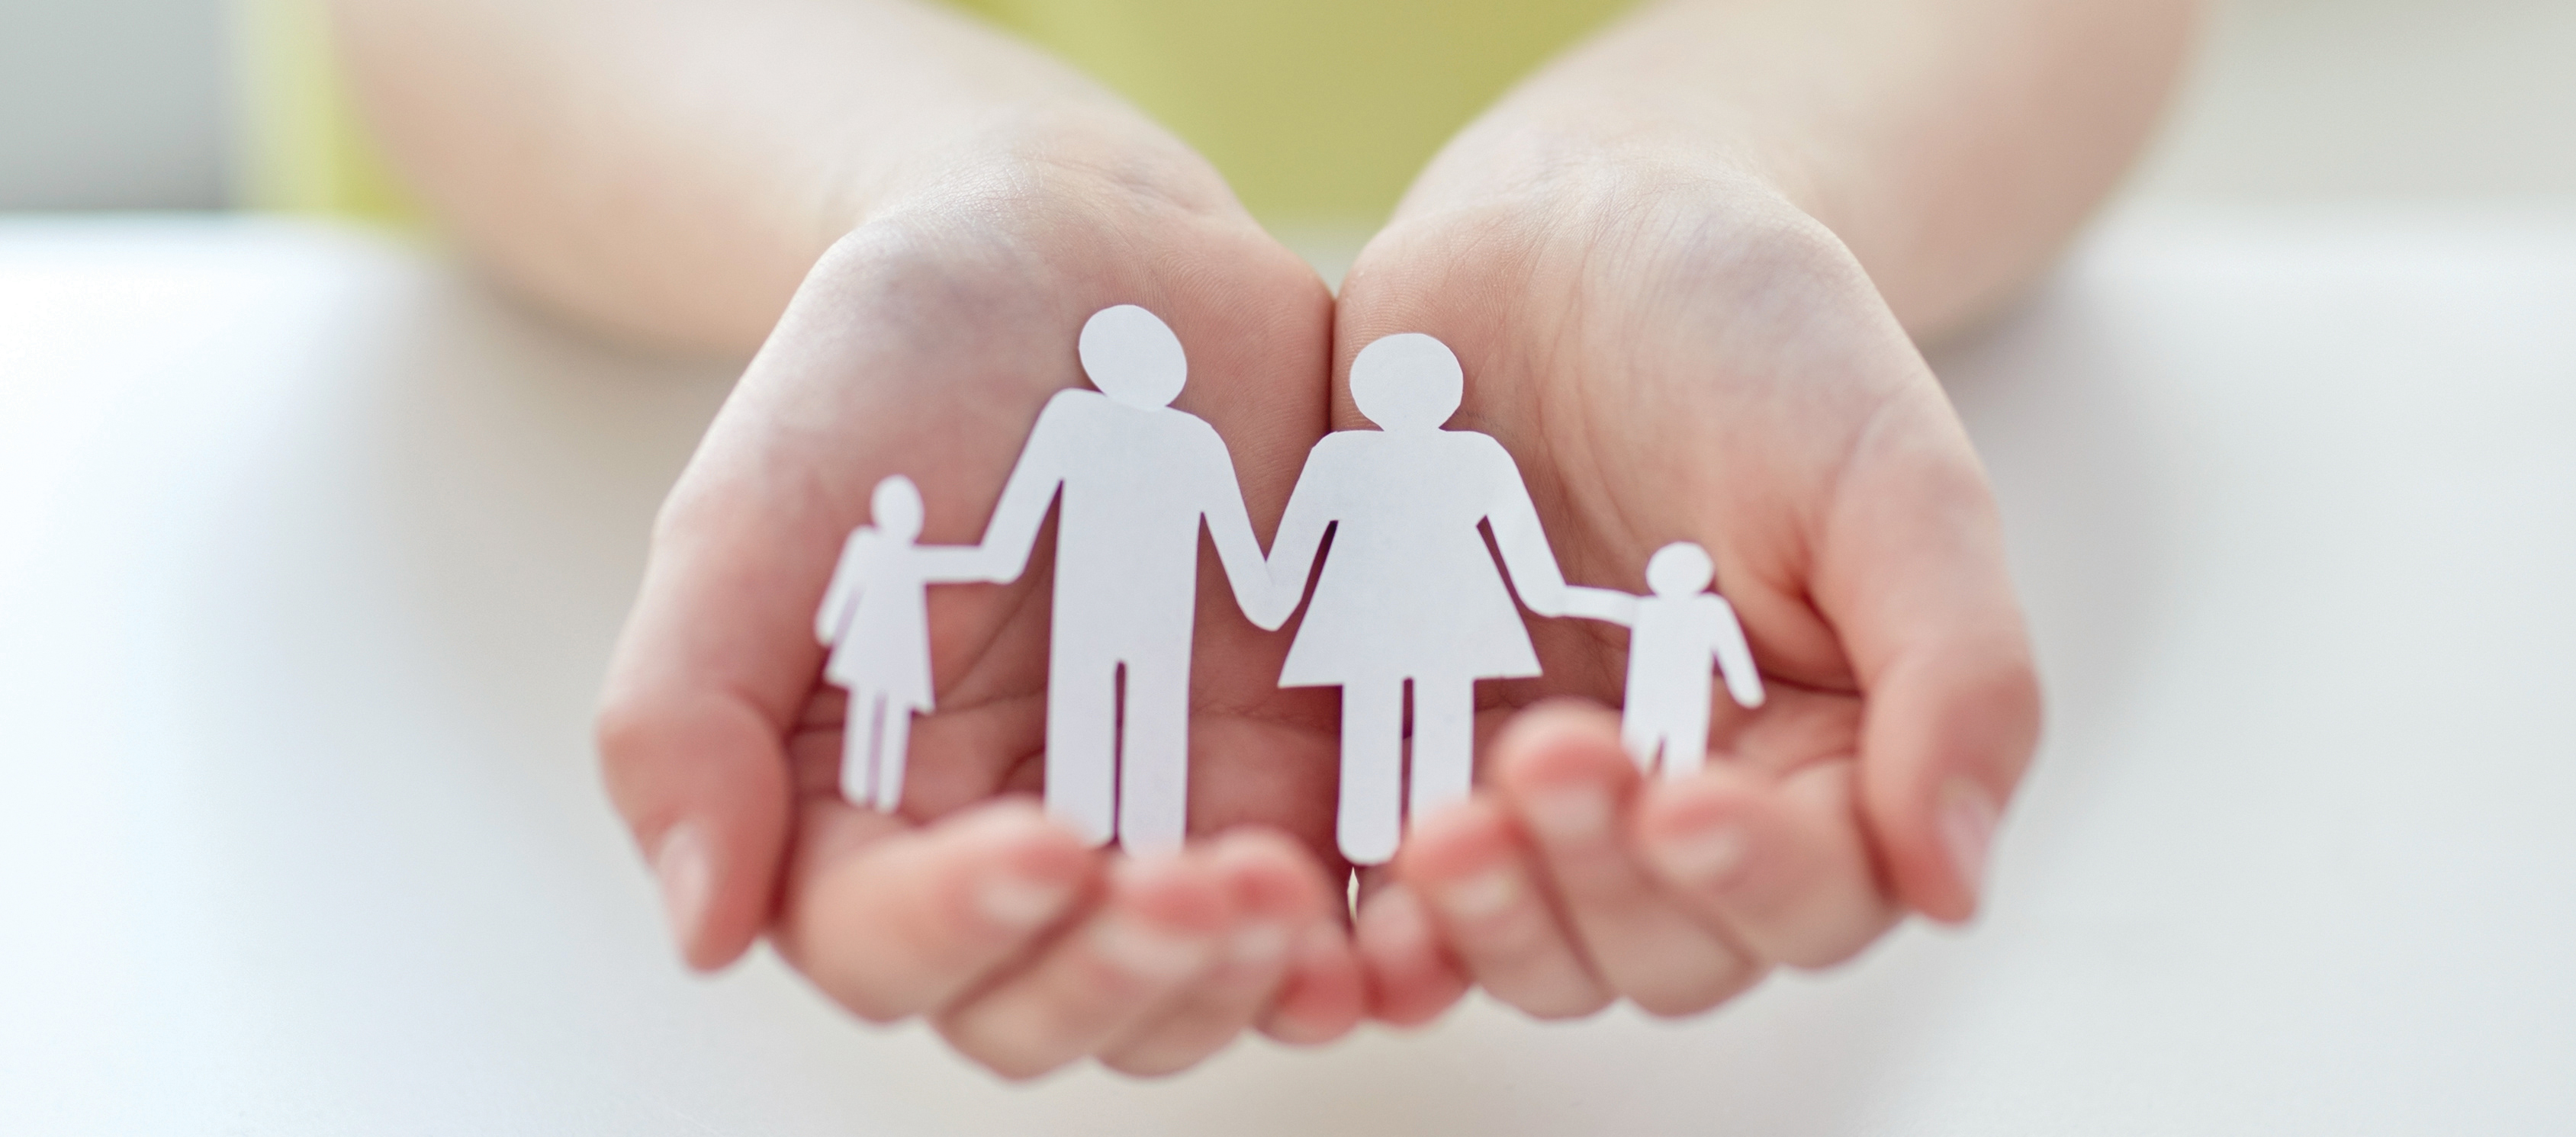 people, charity and care concept - close up of child hands holding paper family cutout at home